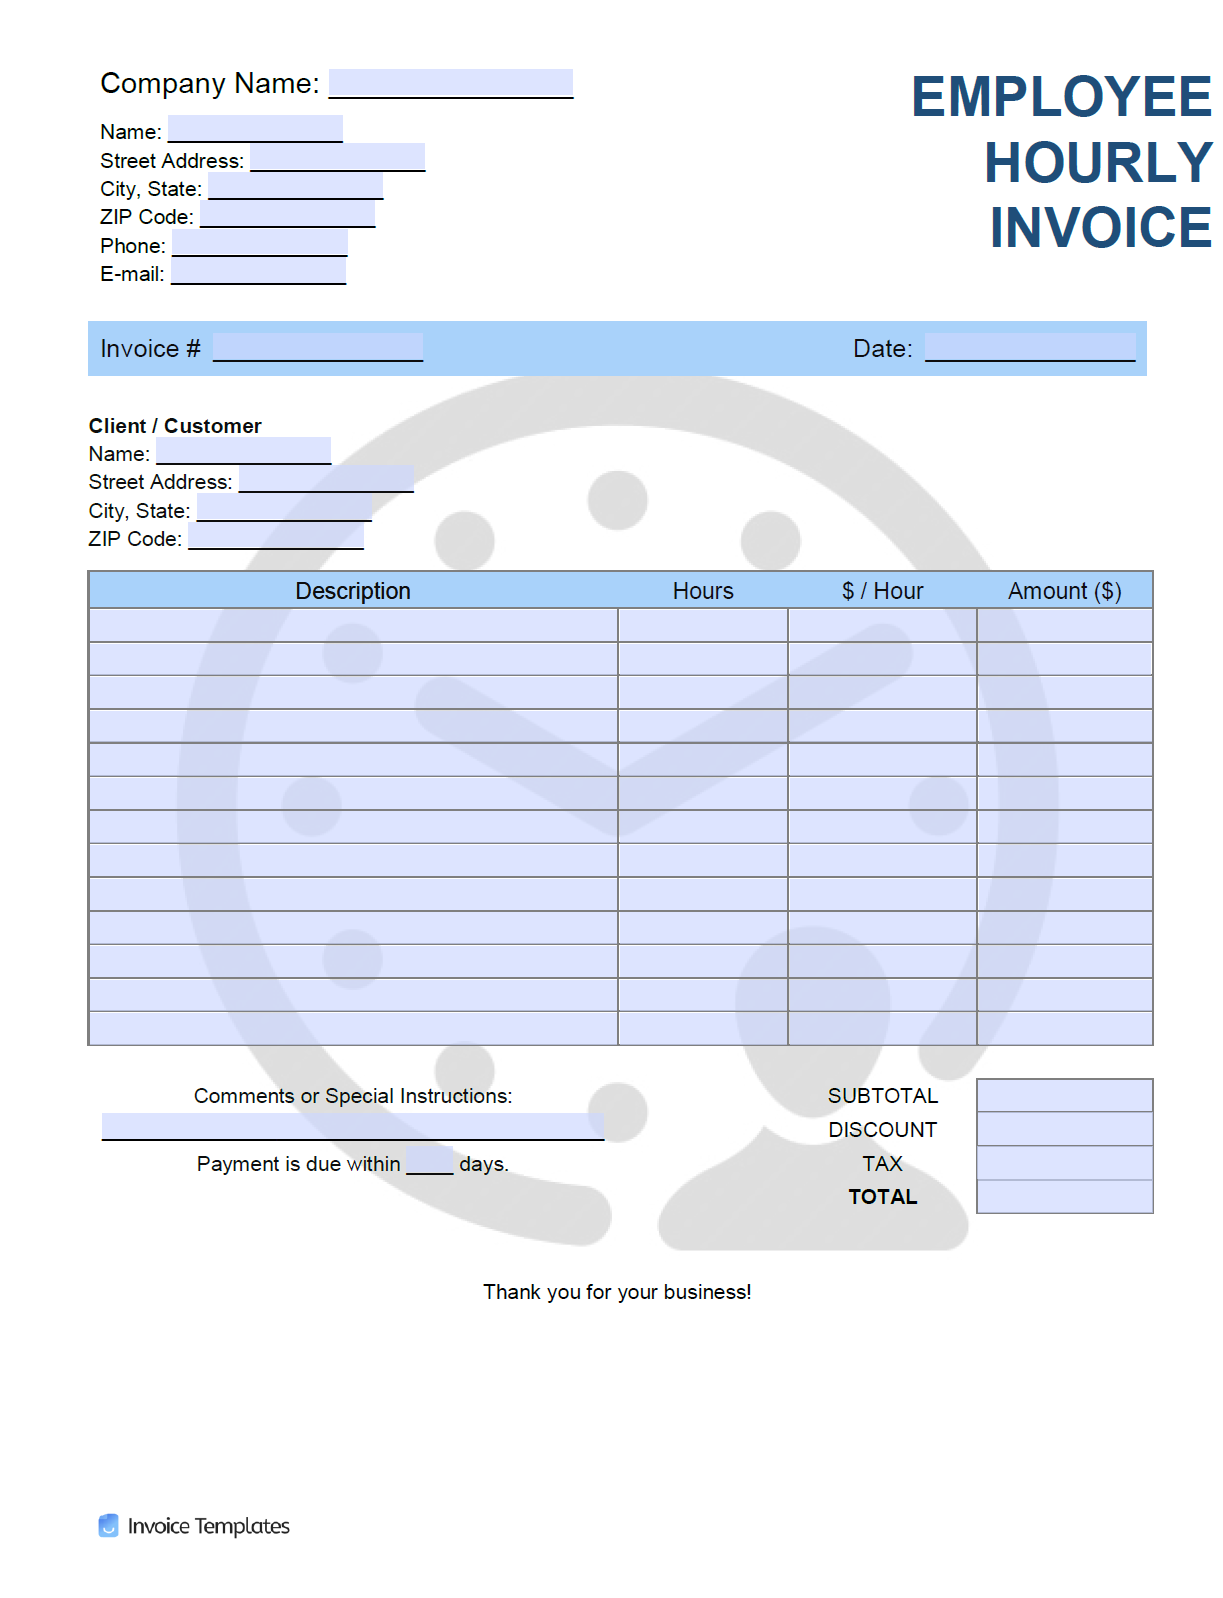 free employee hourly hr invoice template pdf word excel